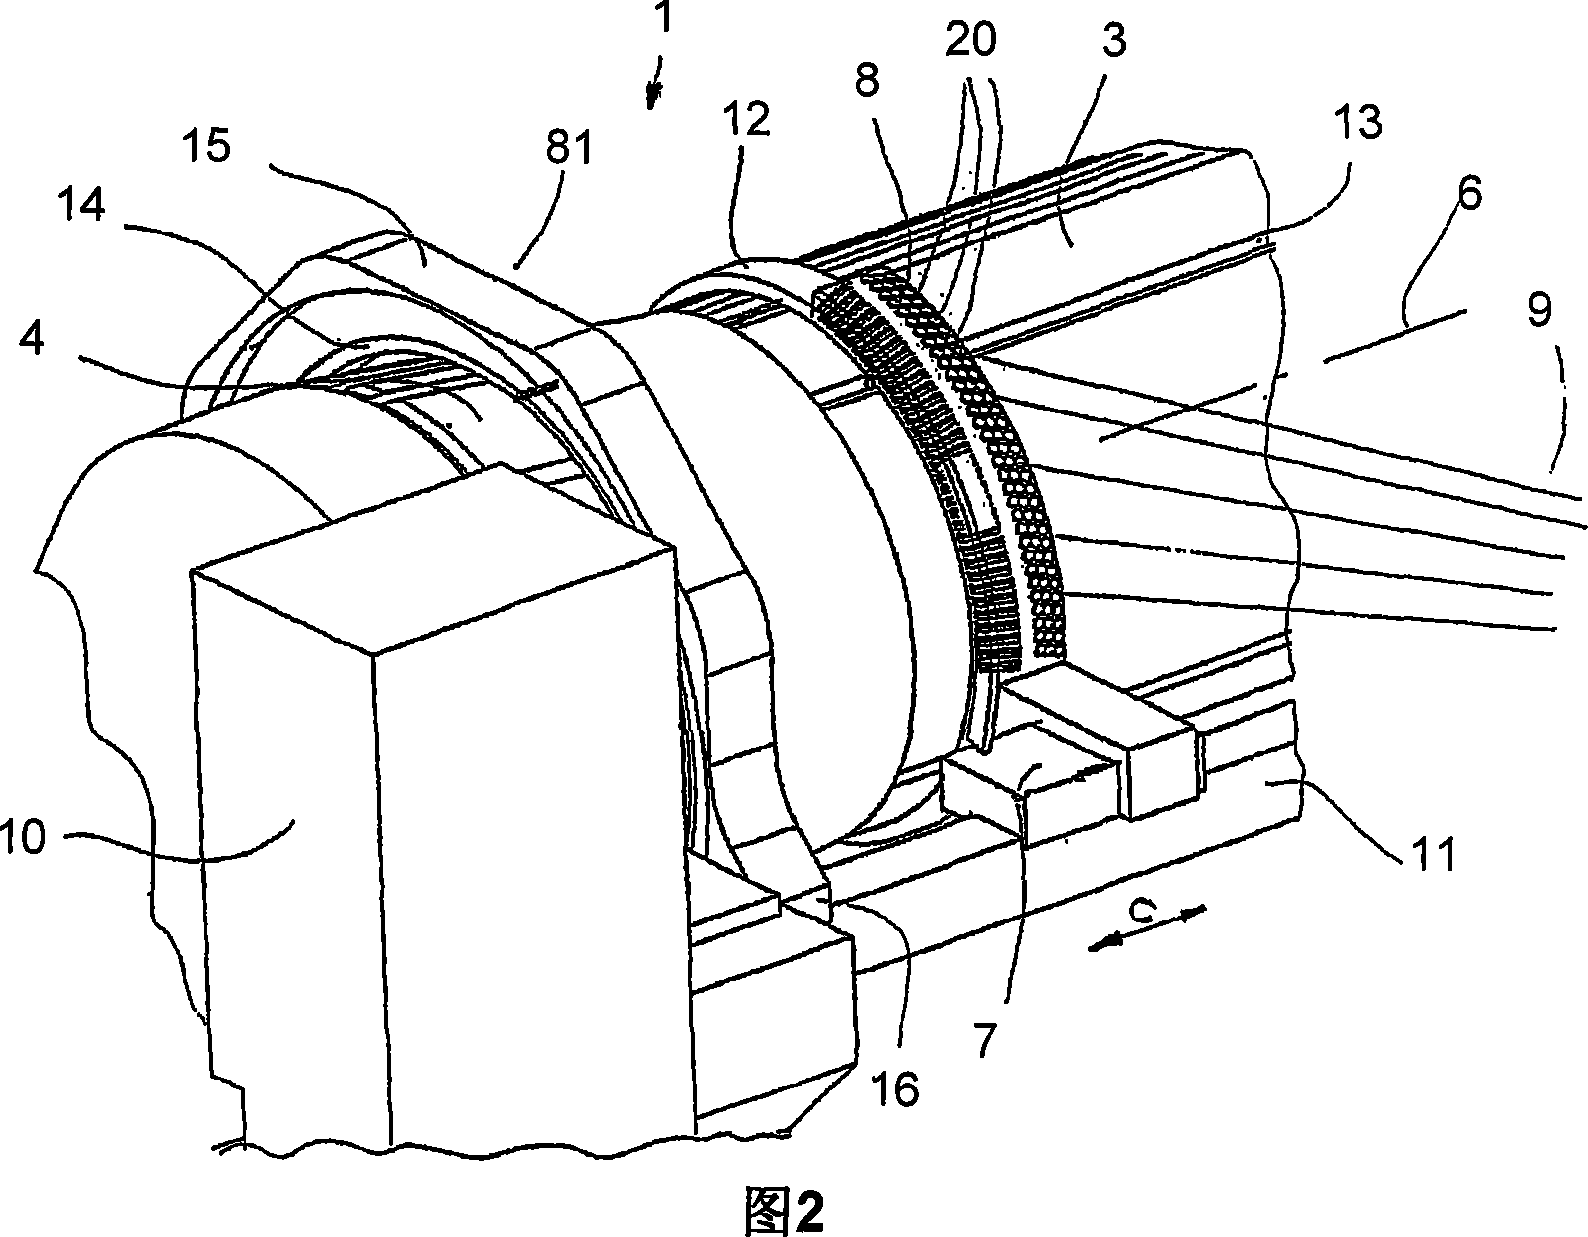 Method and device for thread distribution in a warping frame